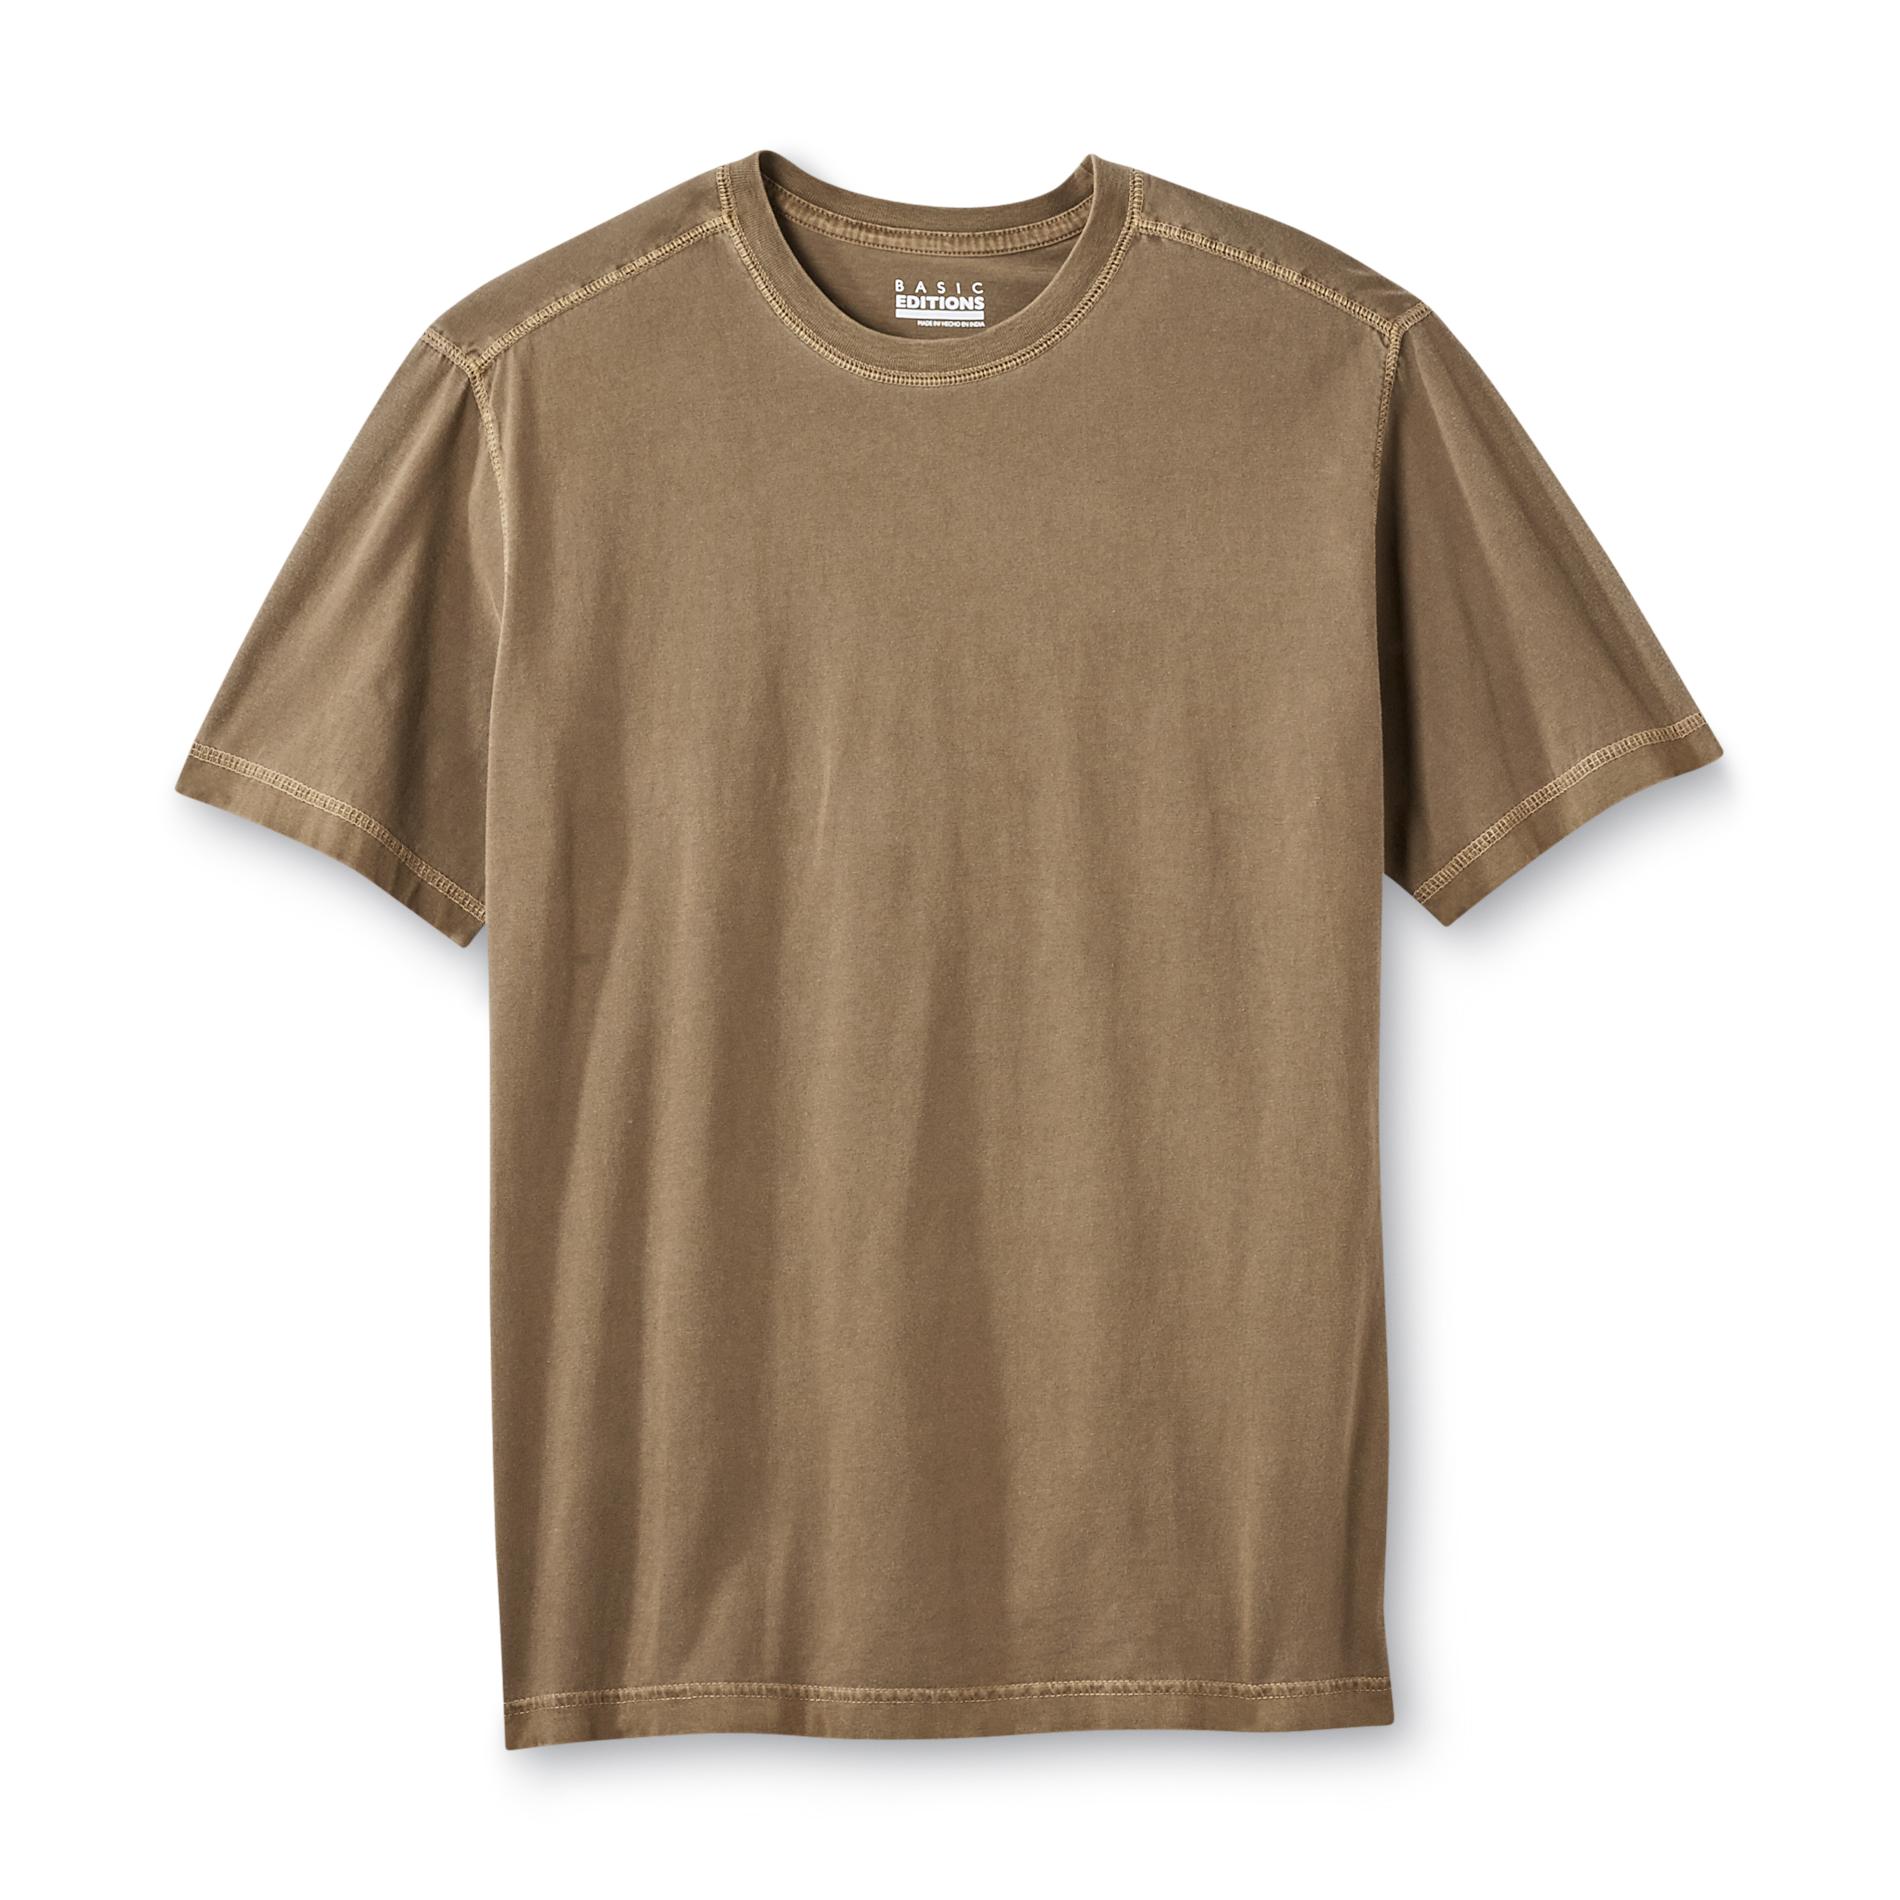 Basic Editions Men's T-Shirt - Pigment Dyed